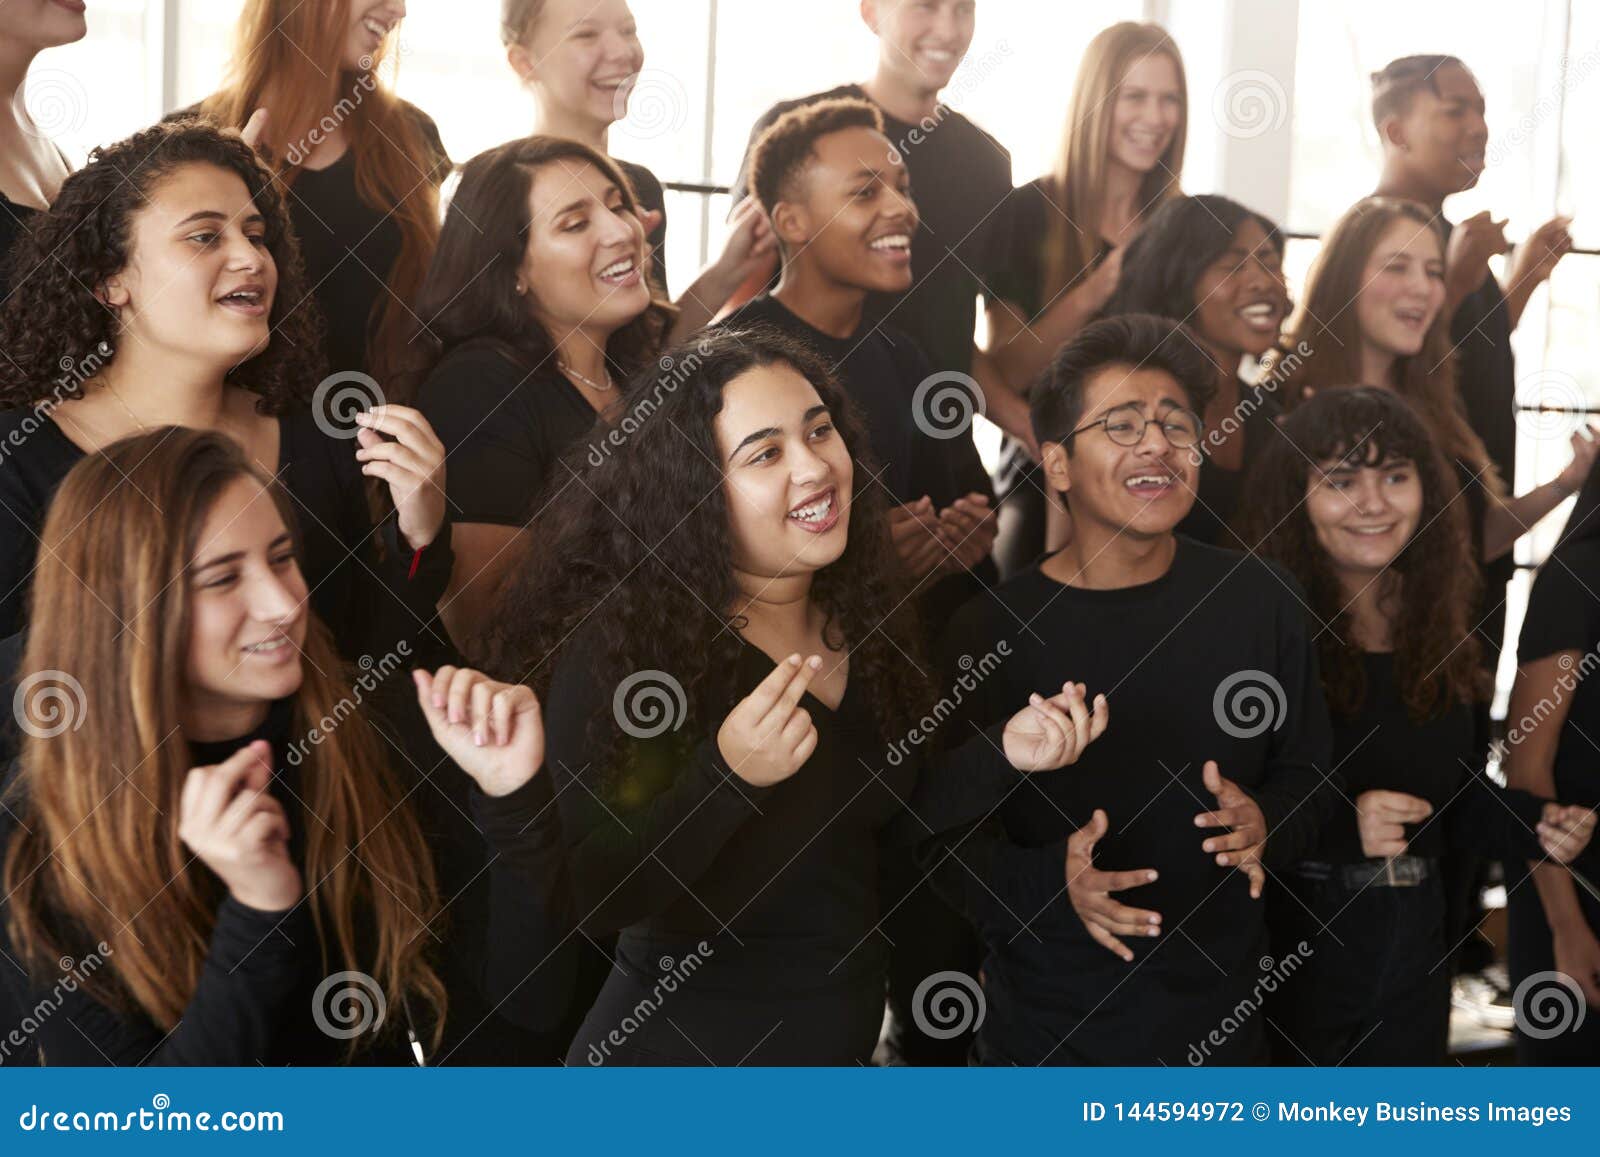 male and female students singing in choir at performing arts school